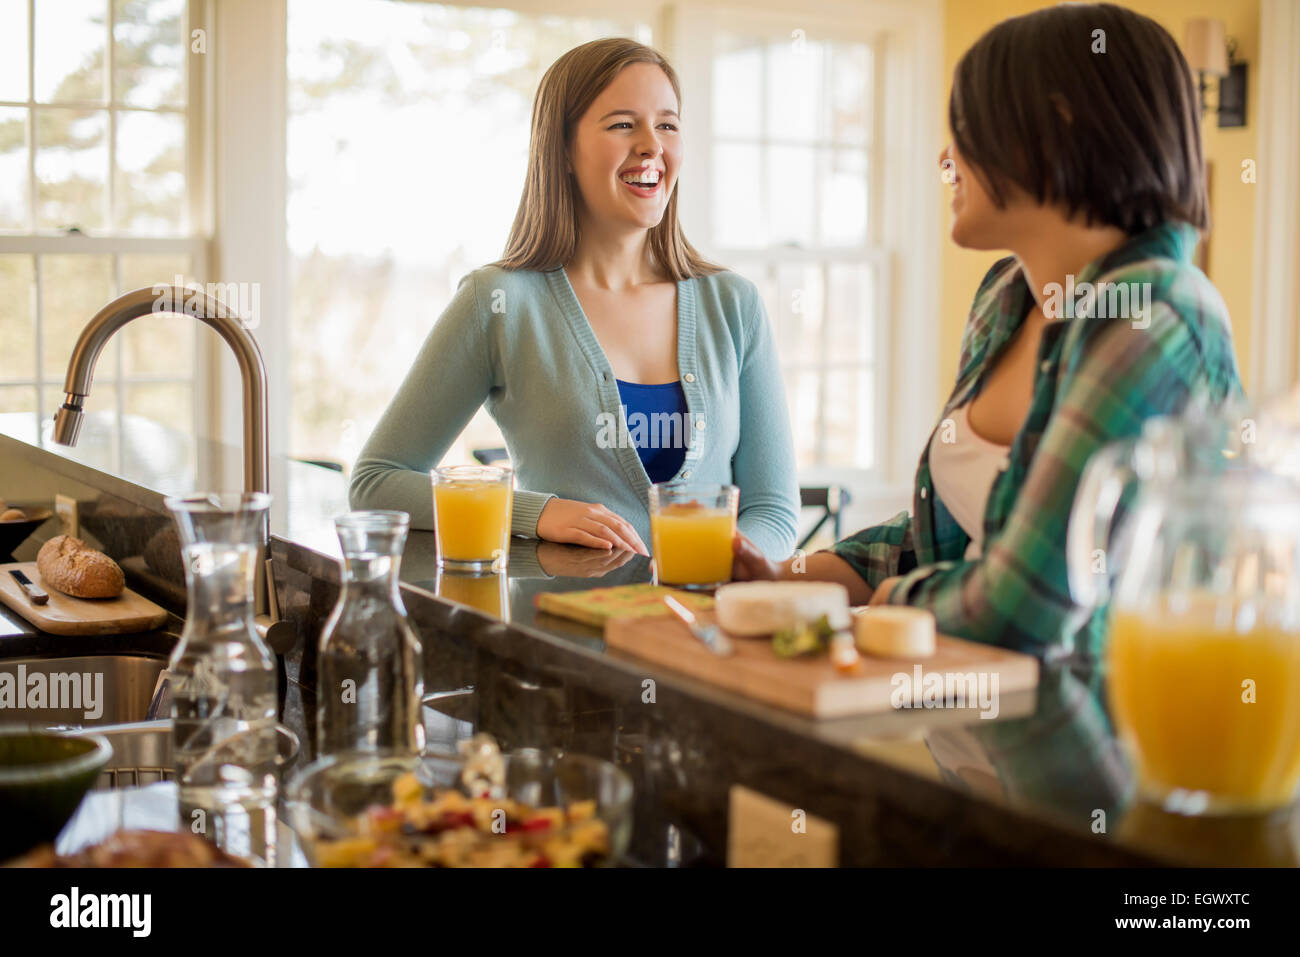 Two women seated at a kitchen counter, talking. Stock Photo